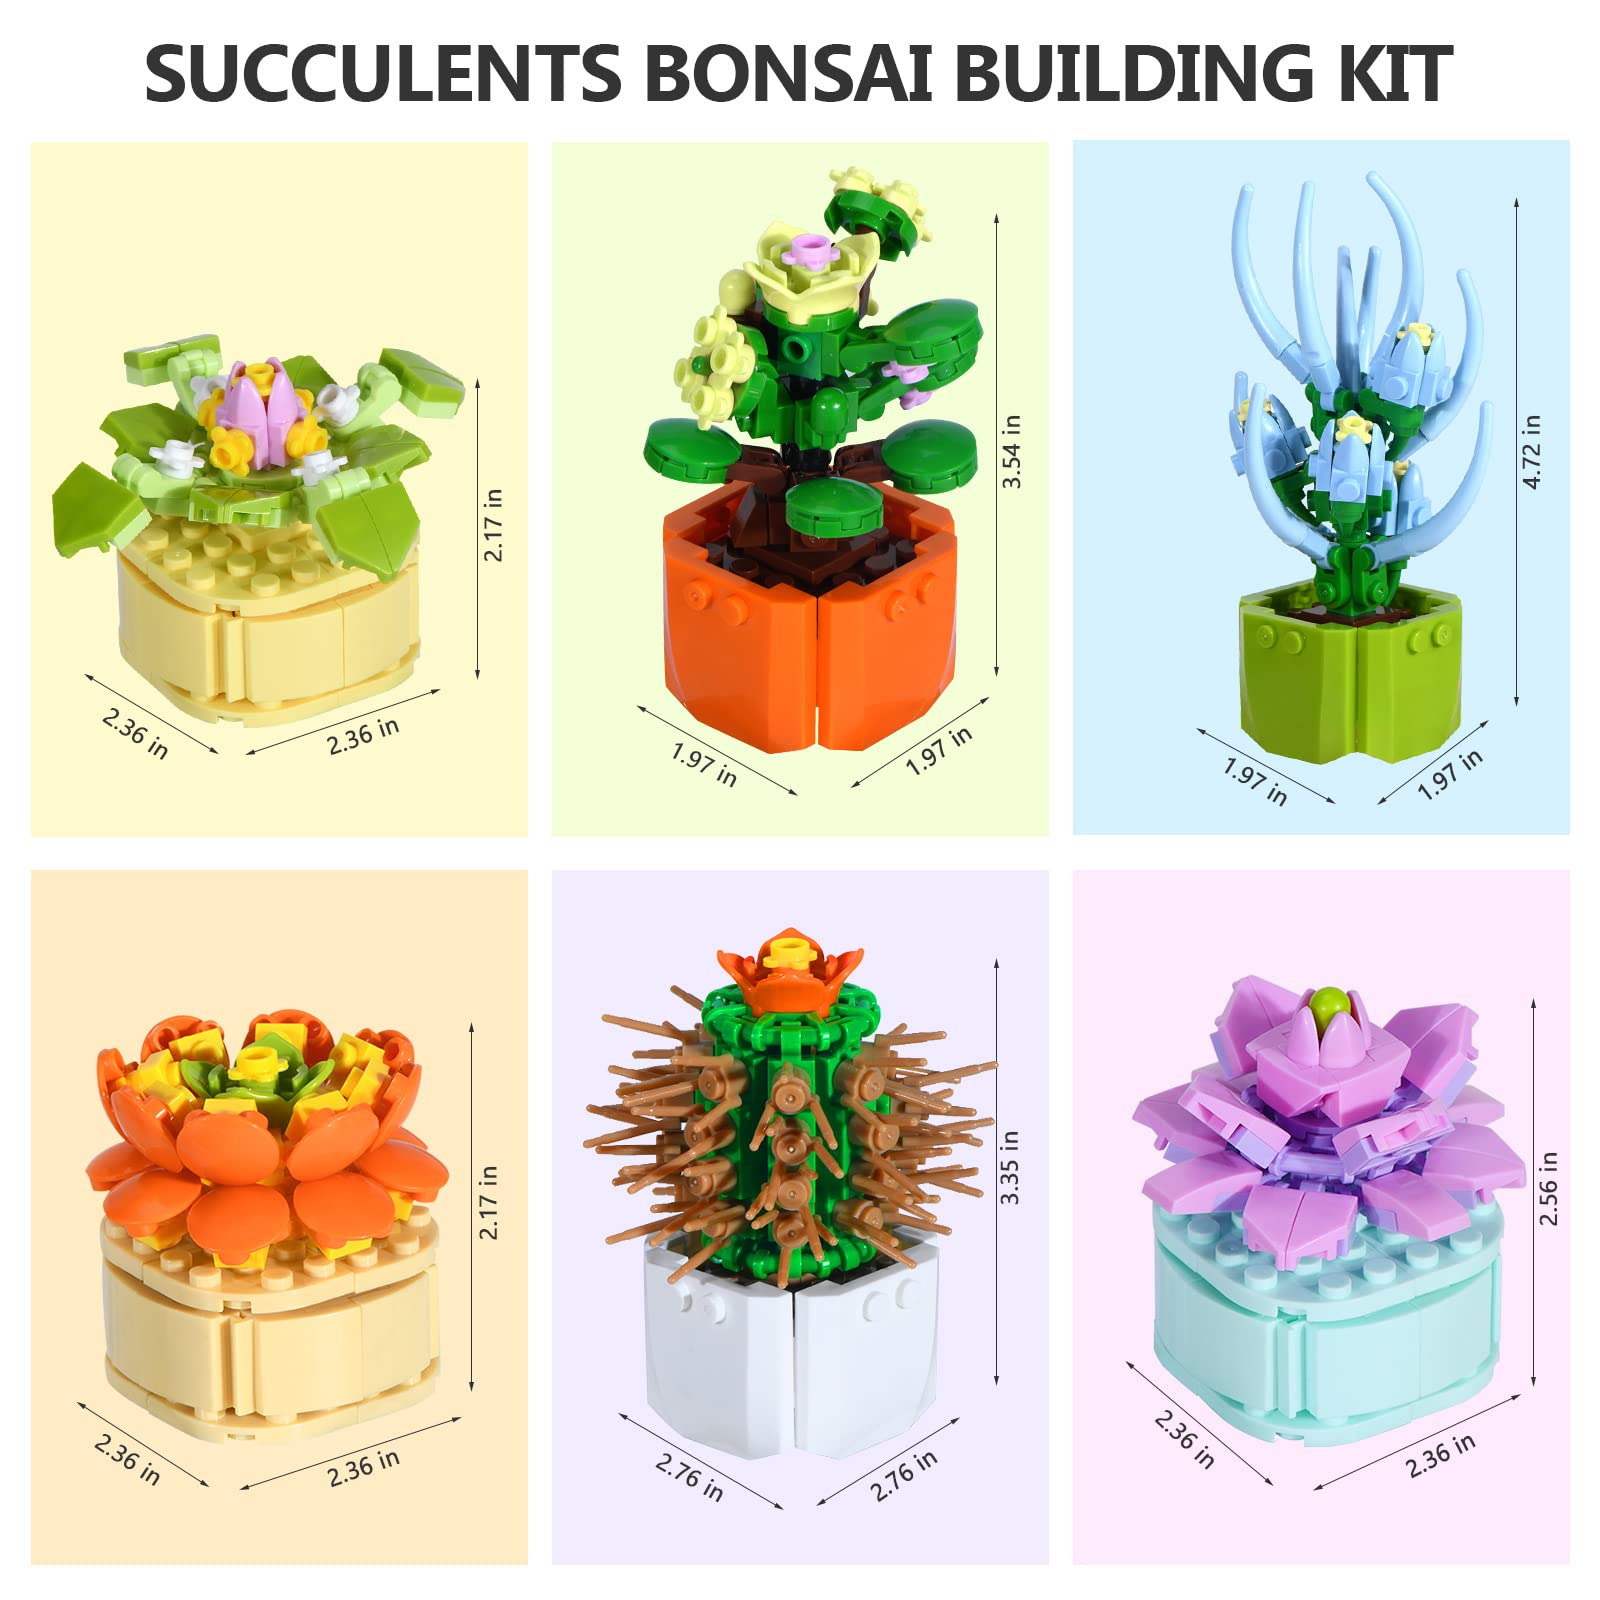 MOONTOY Succulents Artificial Plants Set Building Blocks Toys, 6 Packs Birthday Gifts for Adults Kids, Succulent Botanical Collection Flower Bouquet Kit Home Office Decor Bonsai Creative Gift (521PCS)